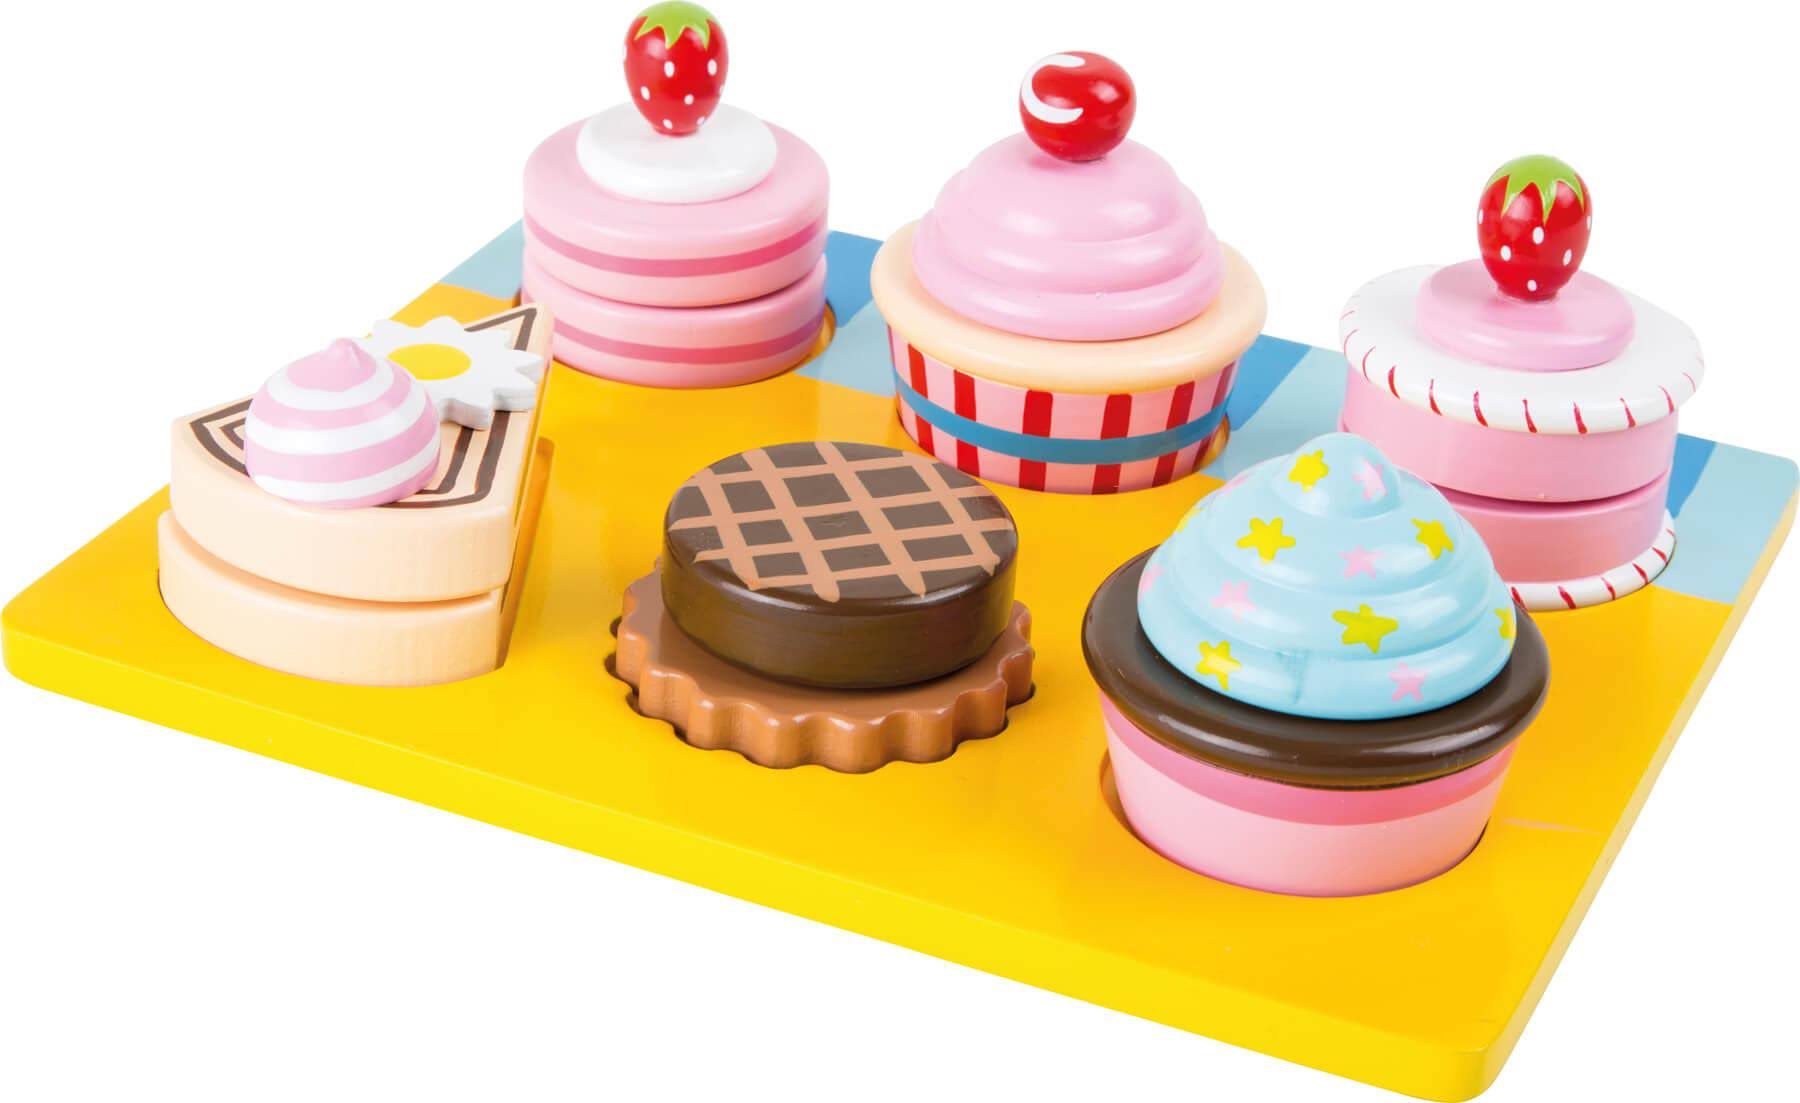 Cut - Cupcakes And Cakes